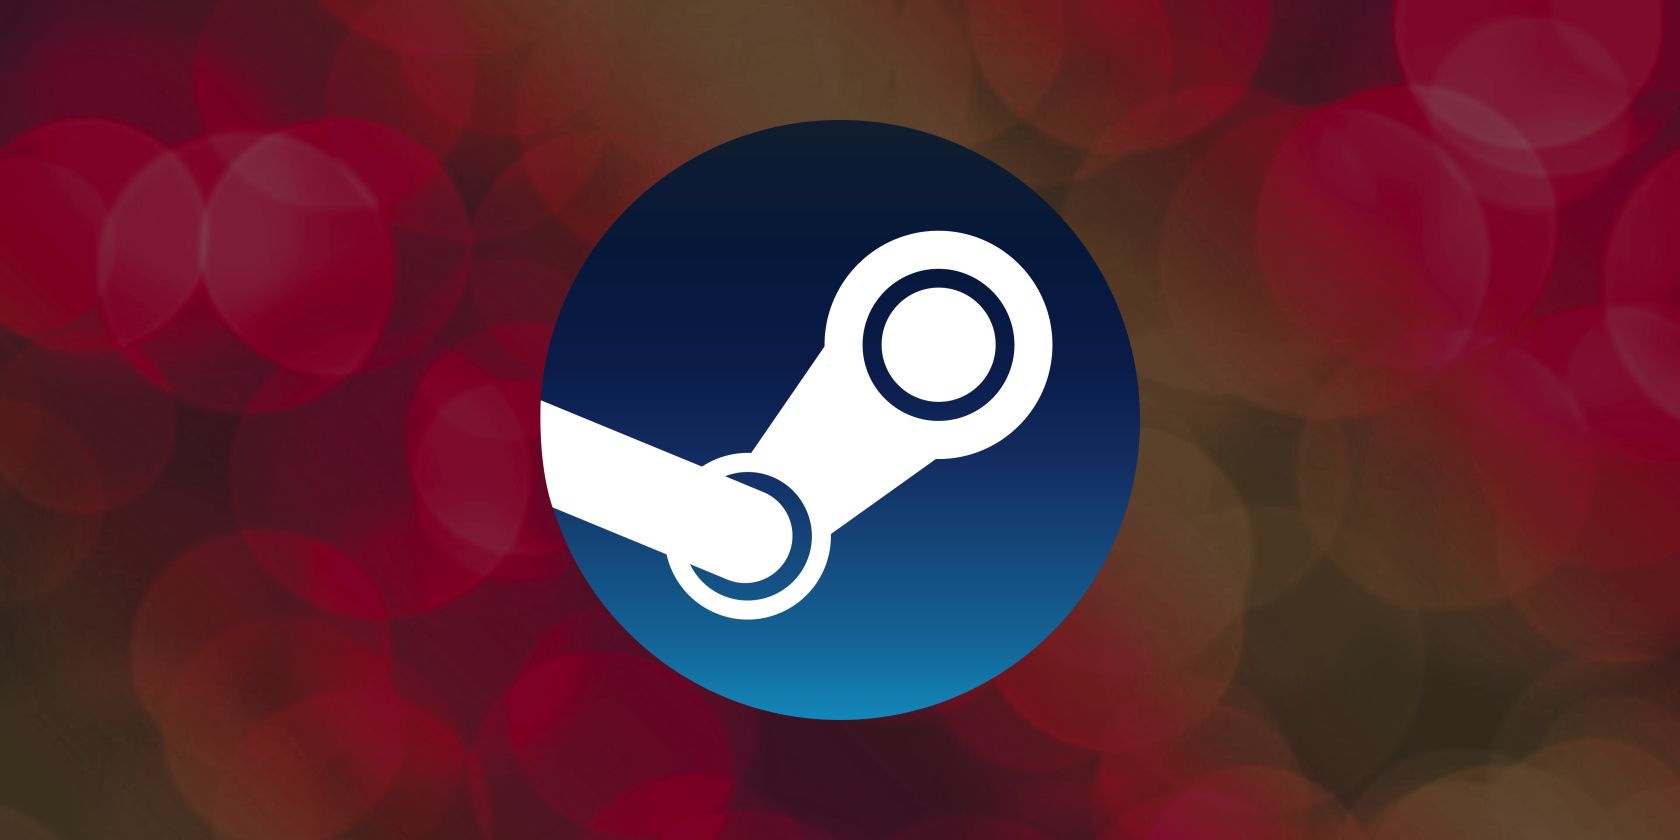 steam logo on abstract background